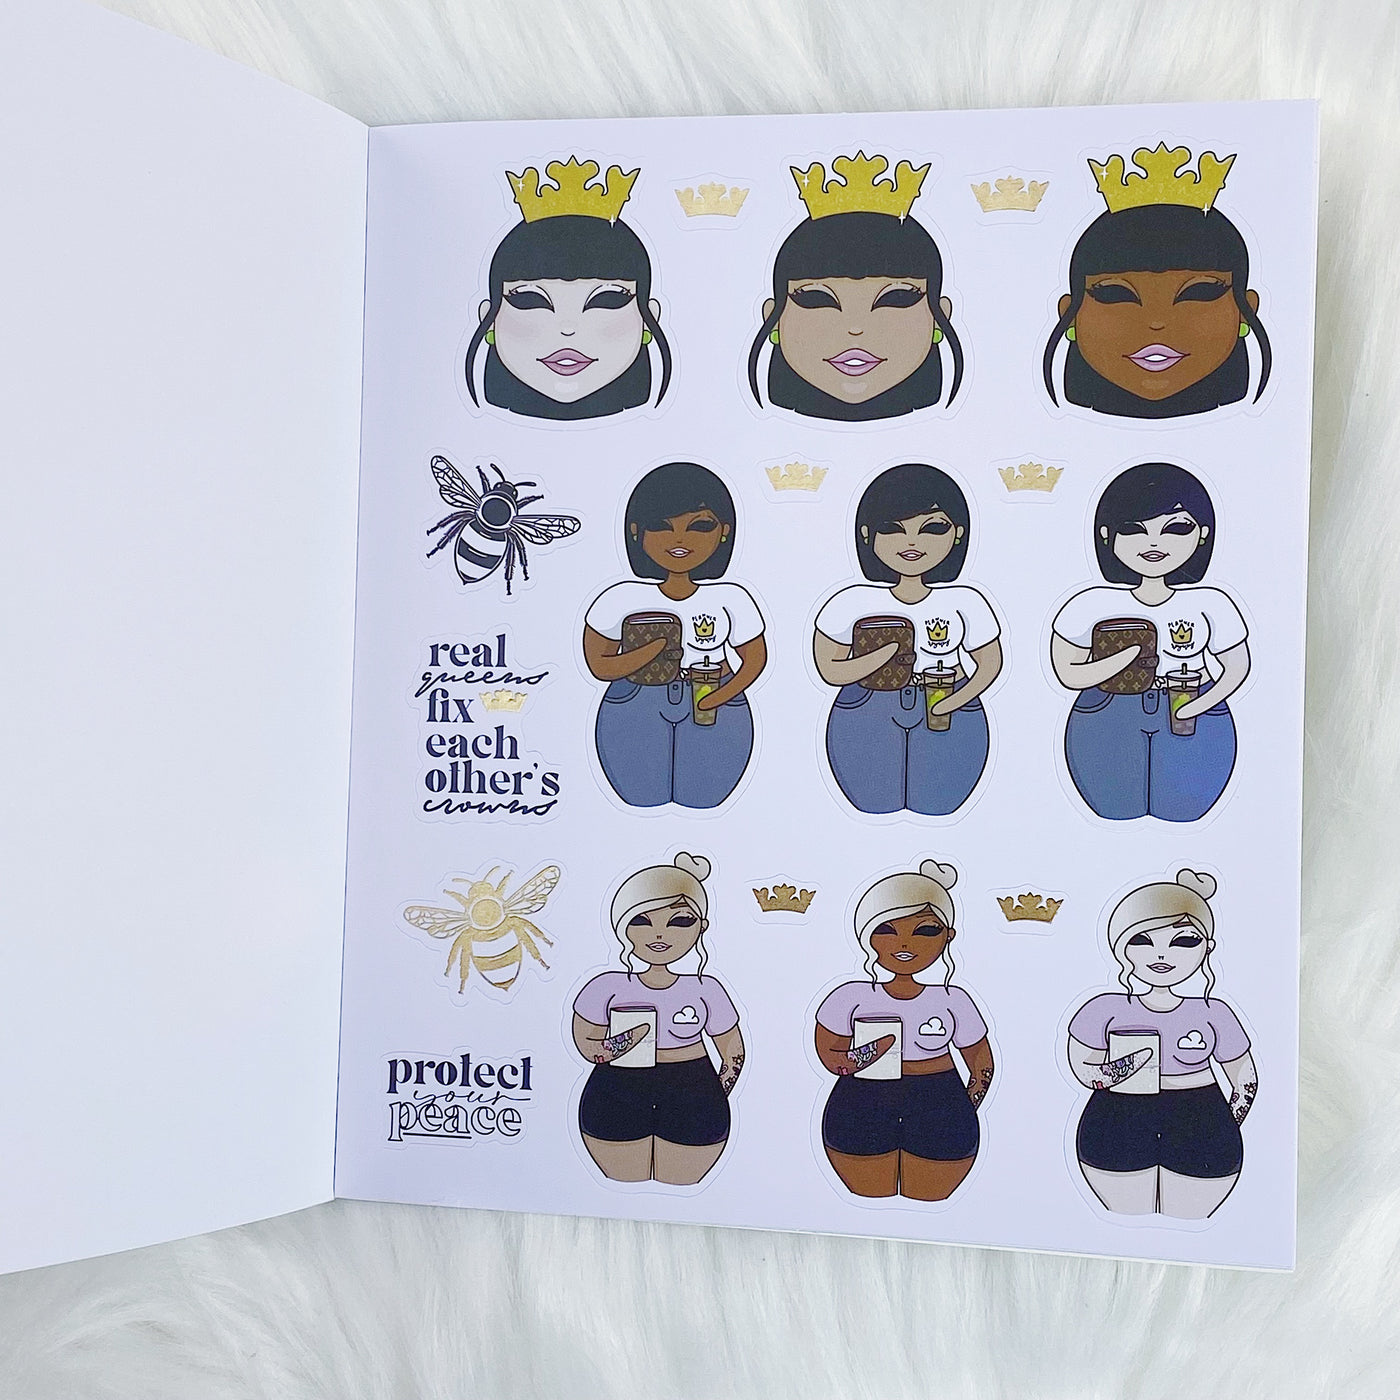 Planner Royalty Sticker Book | 10 Pages | Gold Foiled